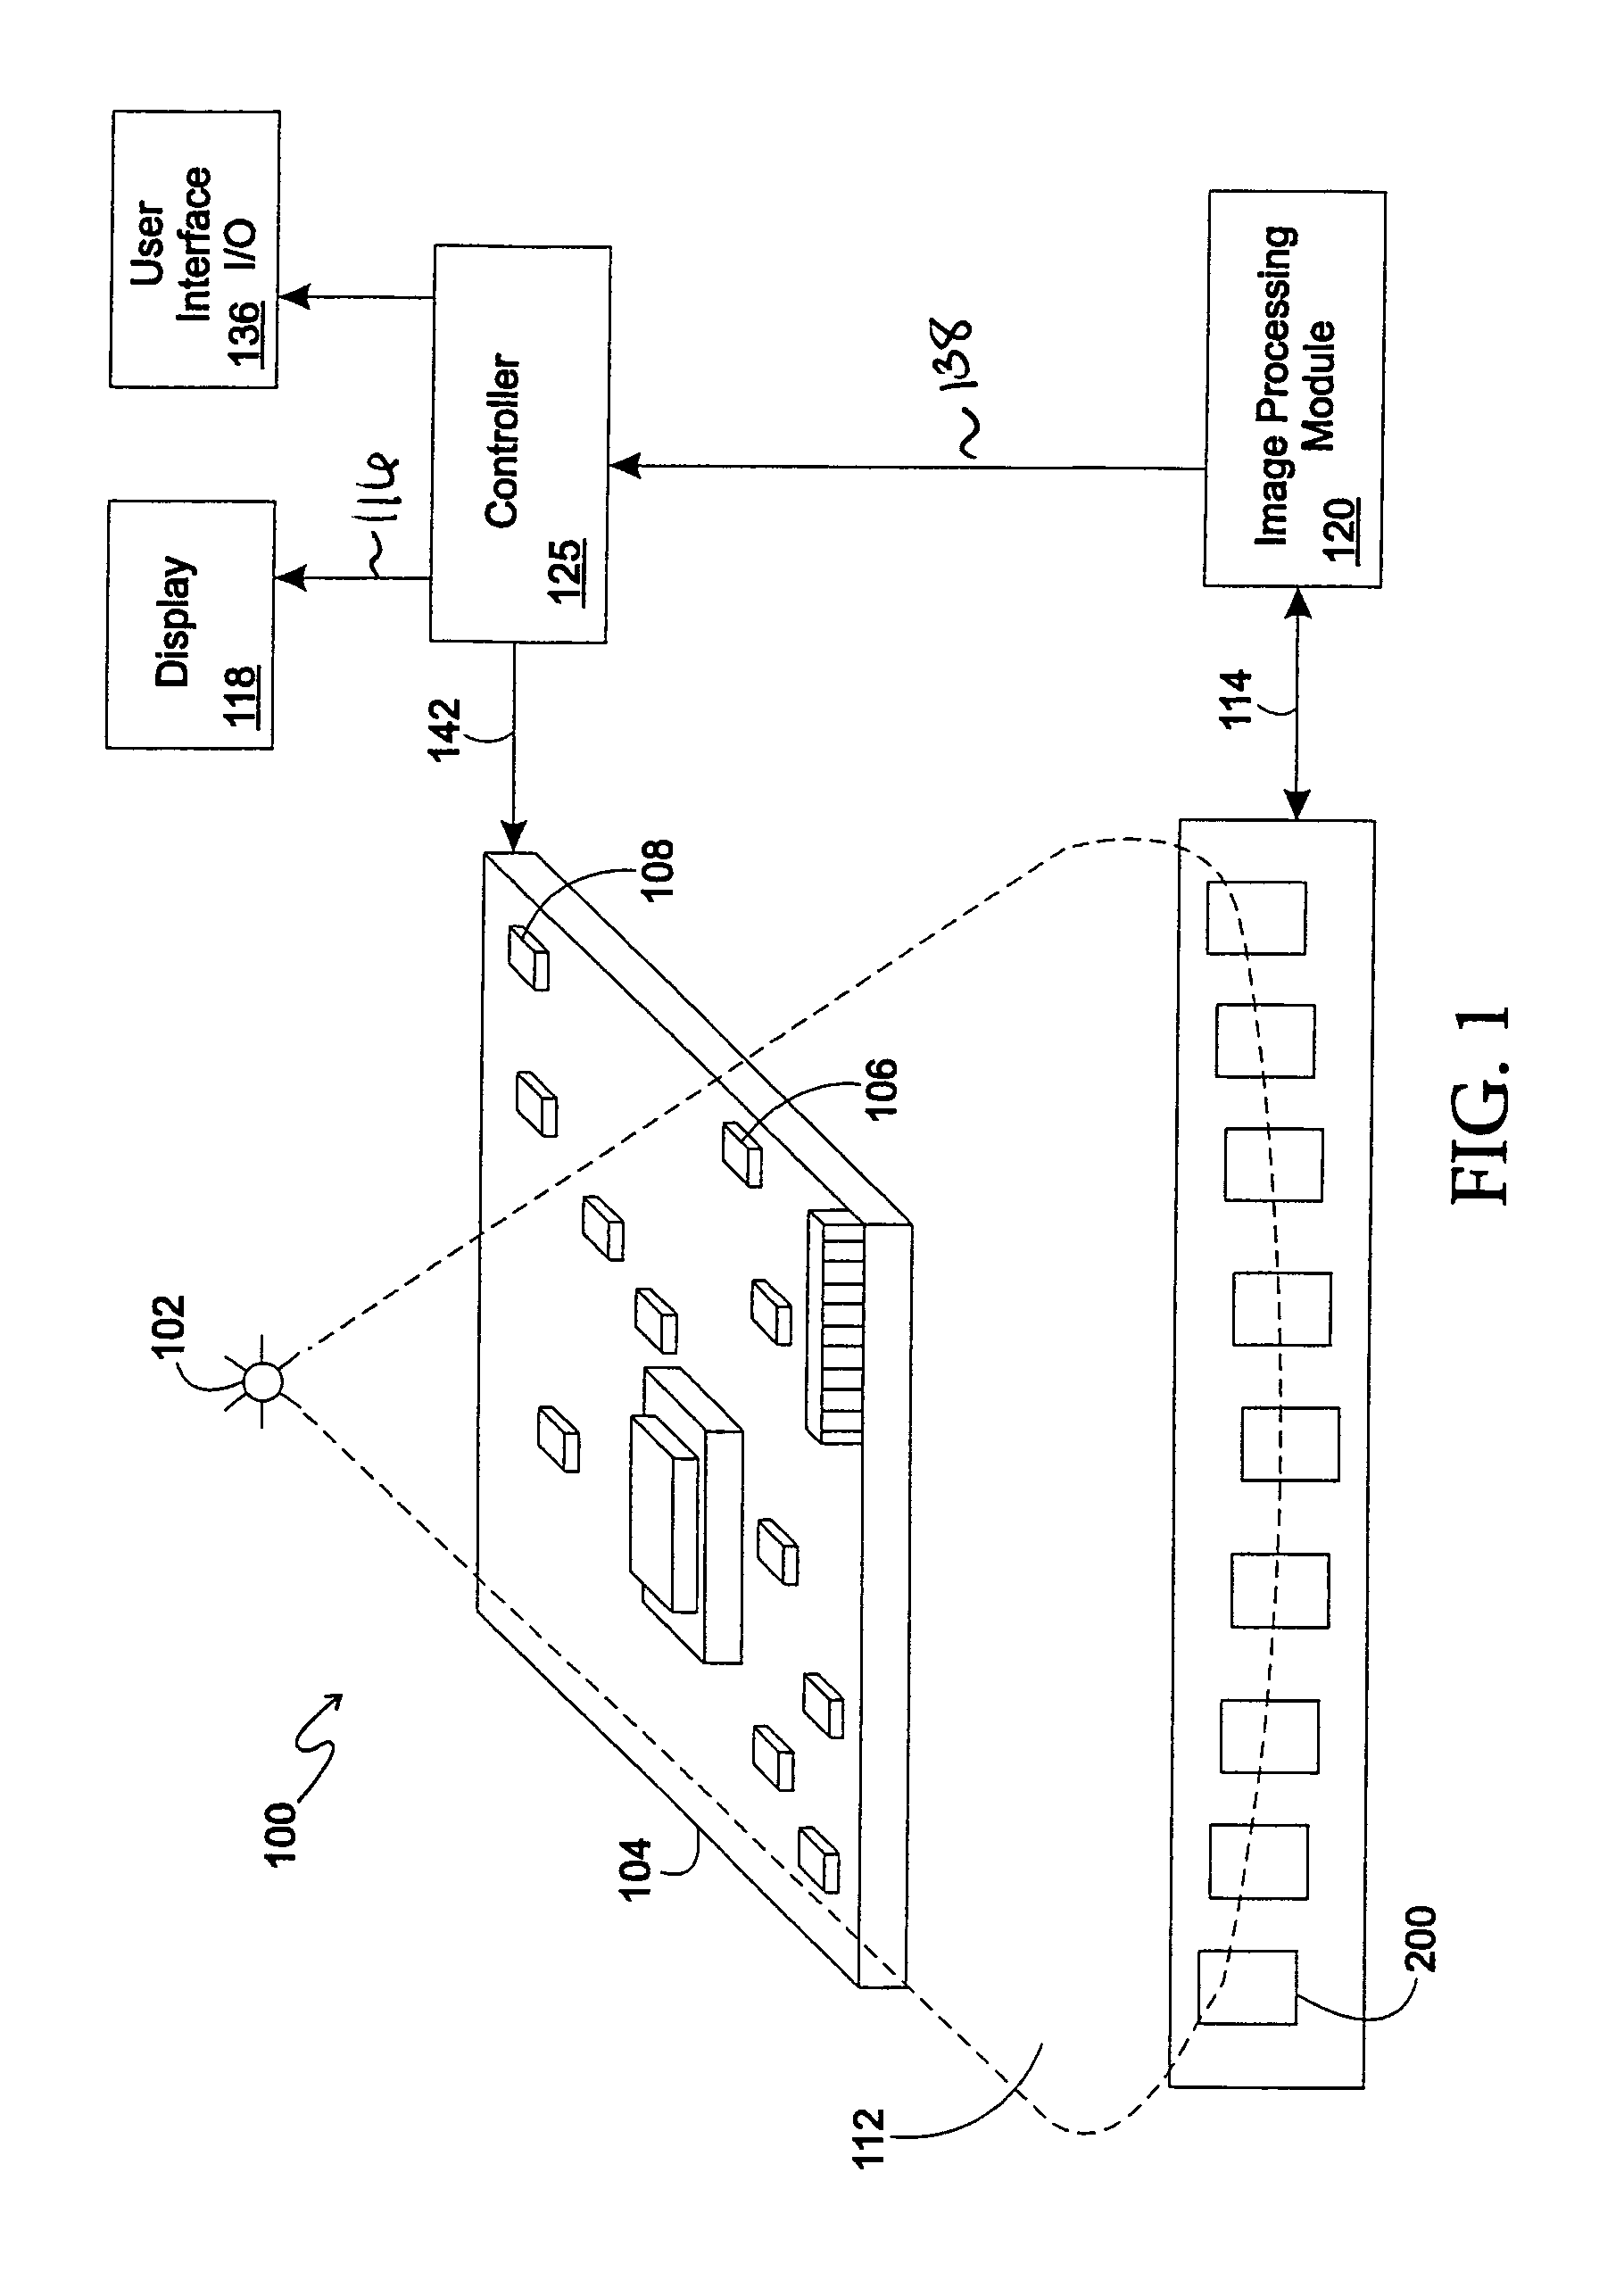 Condensed tungsten composite material and method for manufacturing and sealing a radiation shielding enclosure